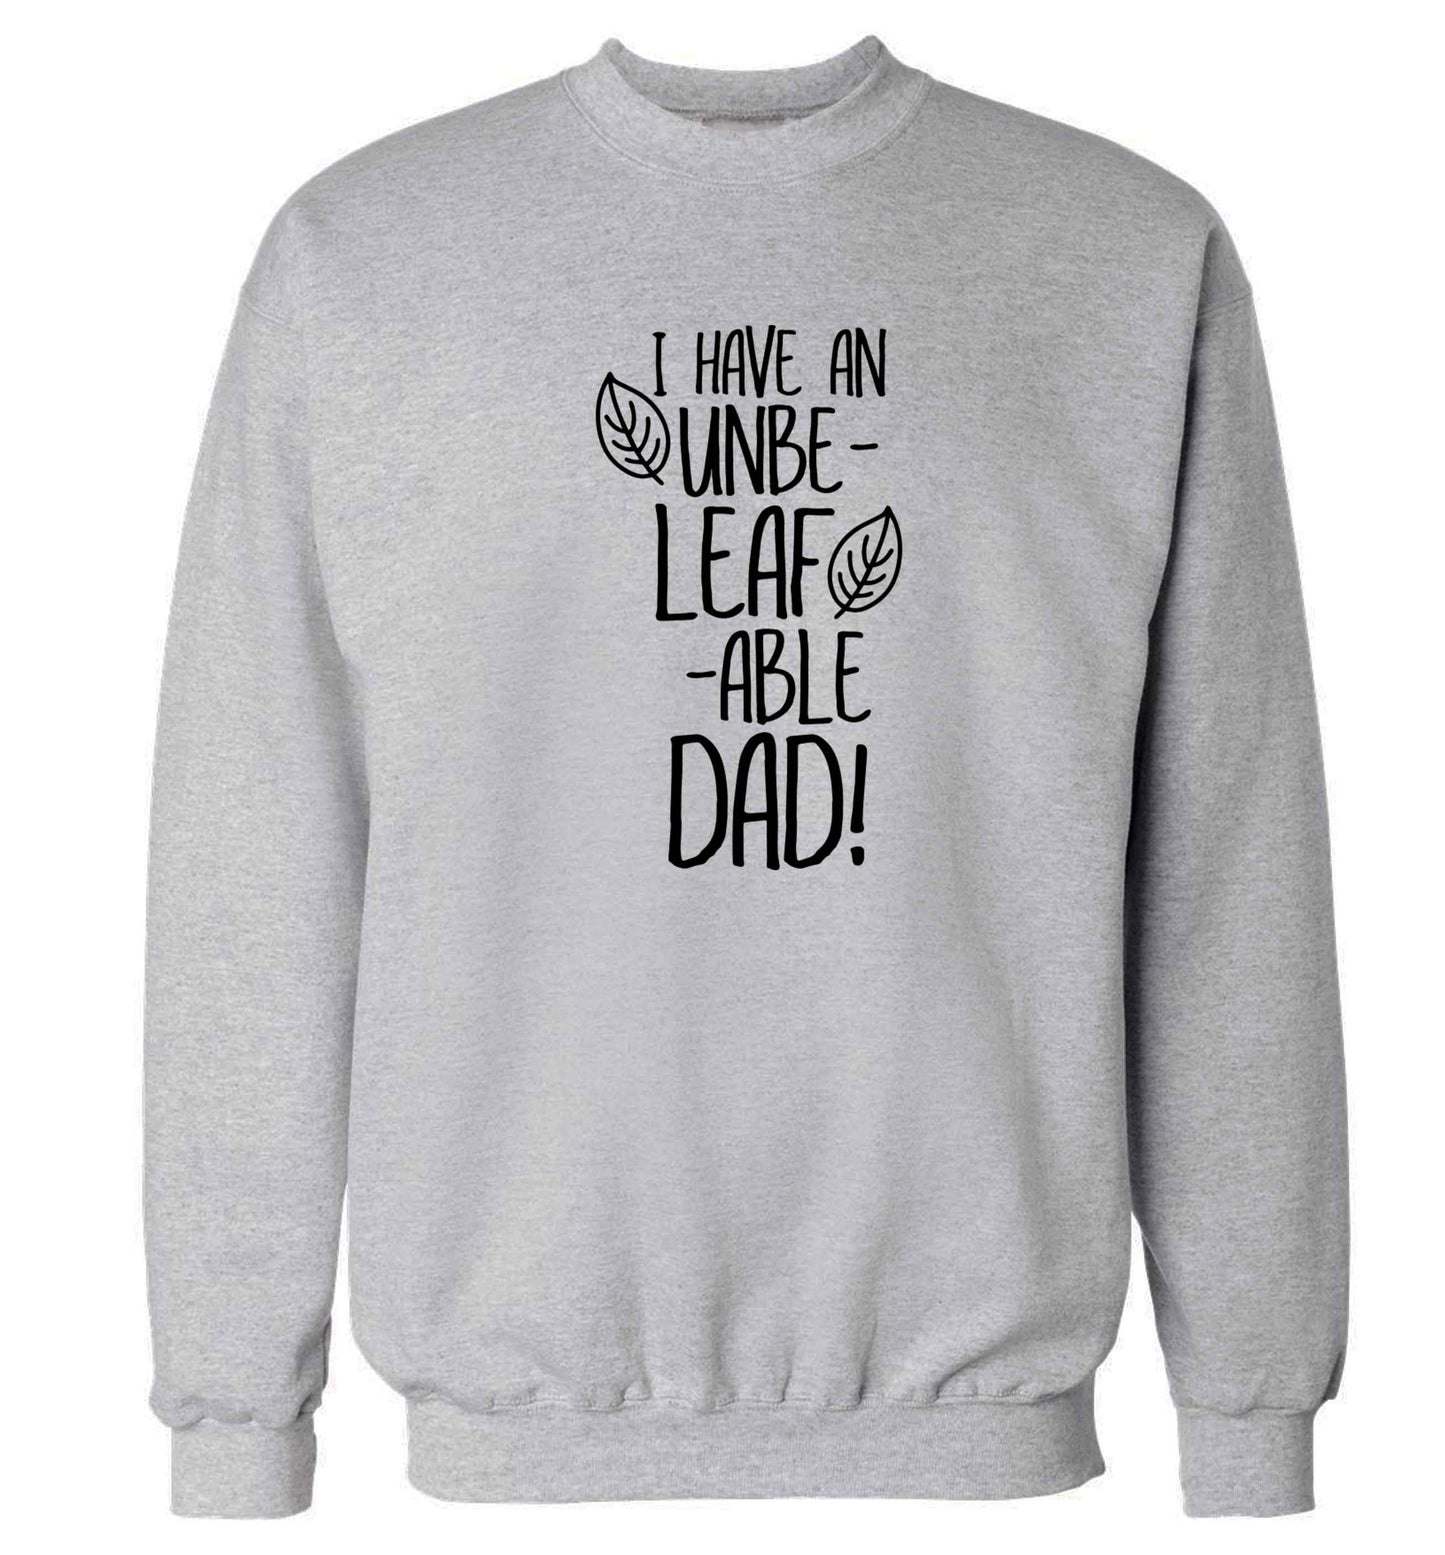 I have an unbe-leaf-able dad Adult's unisex grey Sweater 2XL